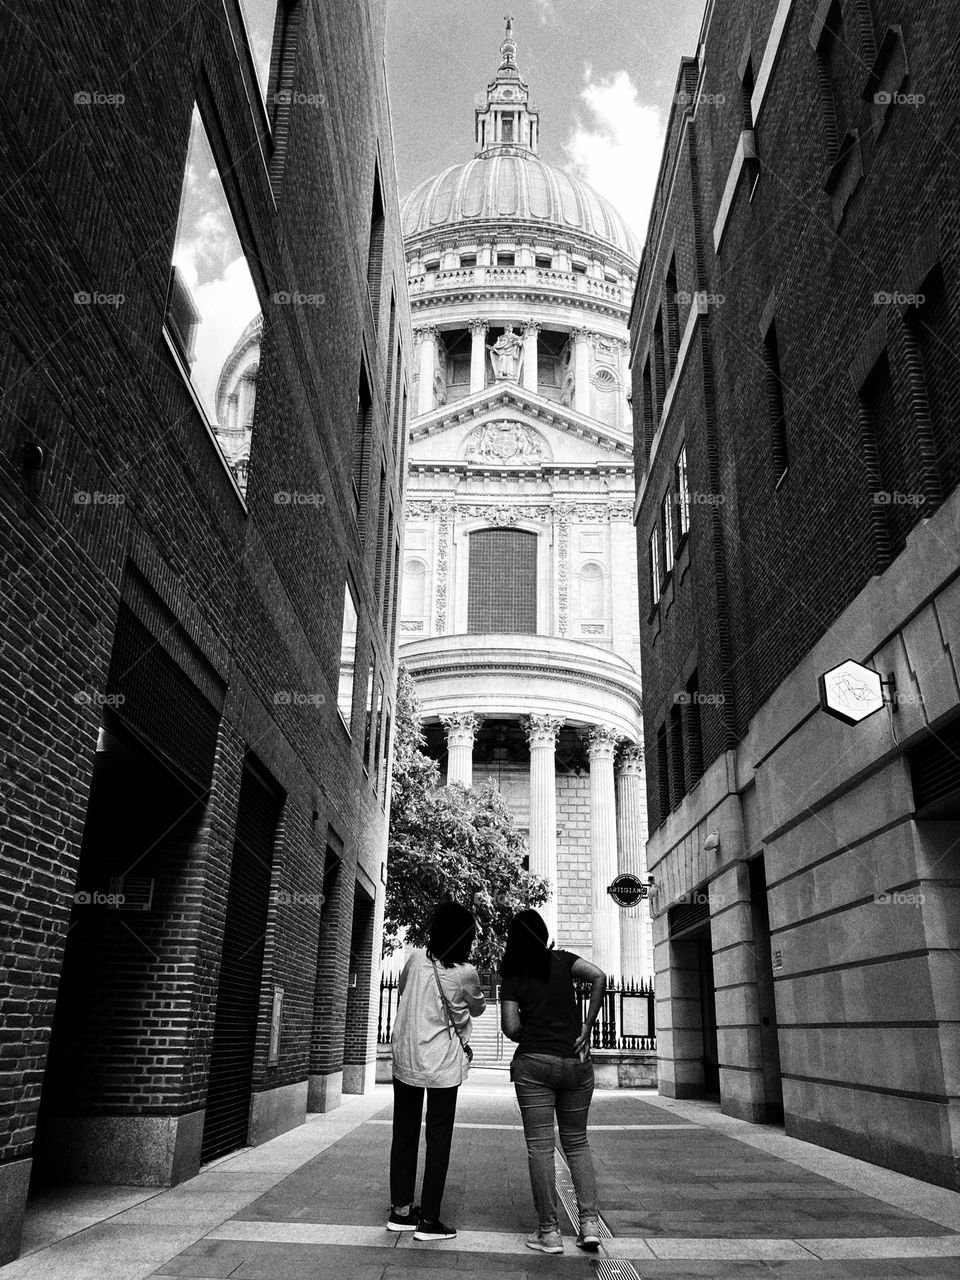 St Paul’s Cathedral with a reflection in a window in Black and White 🤍🖤